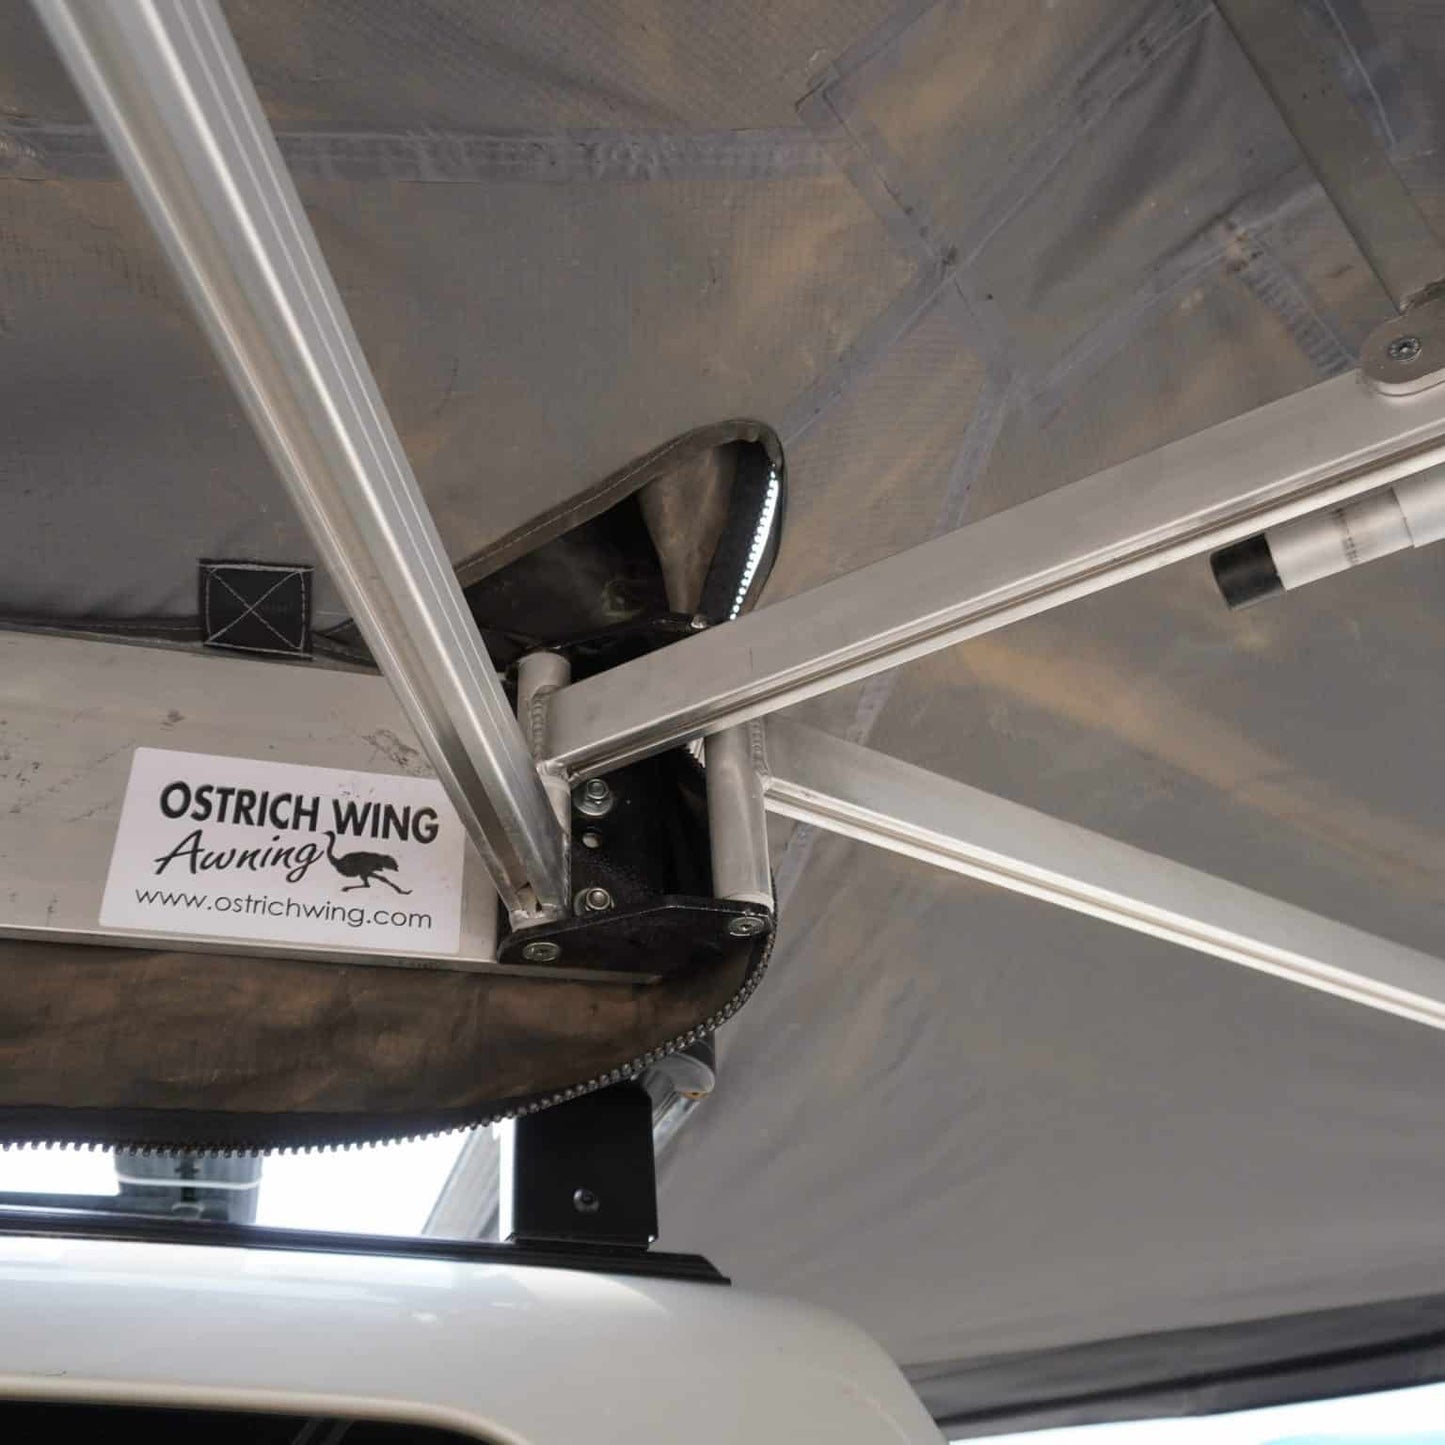 Rugged Bound Ostrich Wing Junior Awning